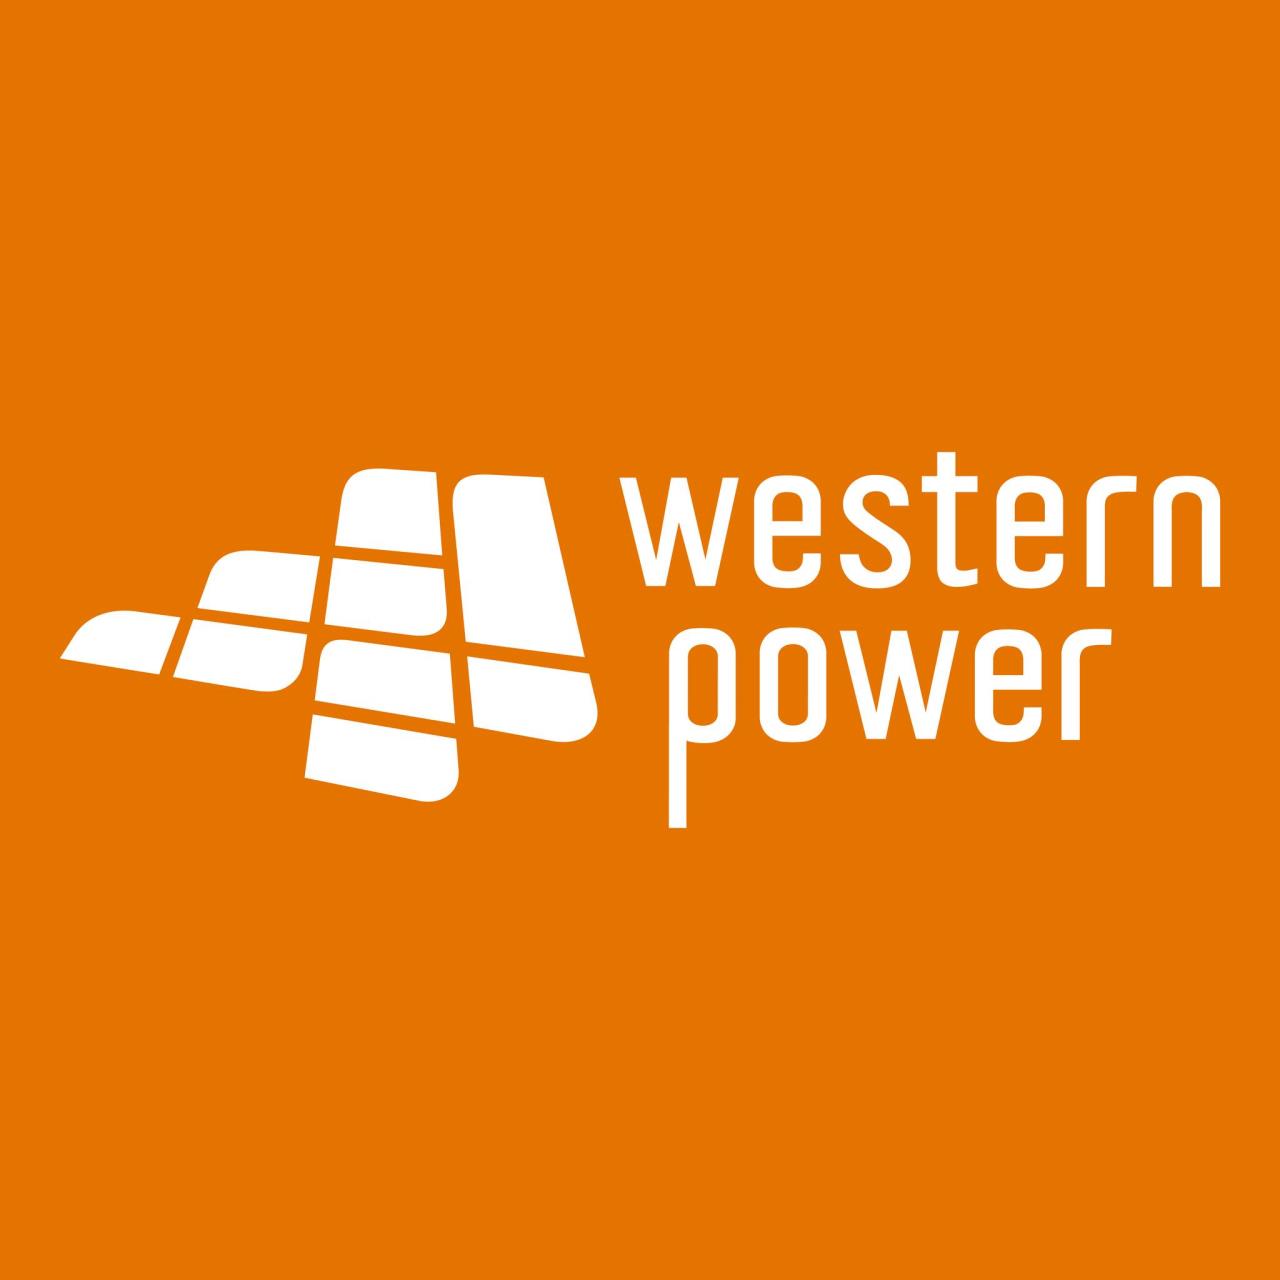 New reliability data available on Western Power website